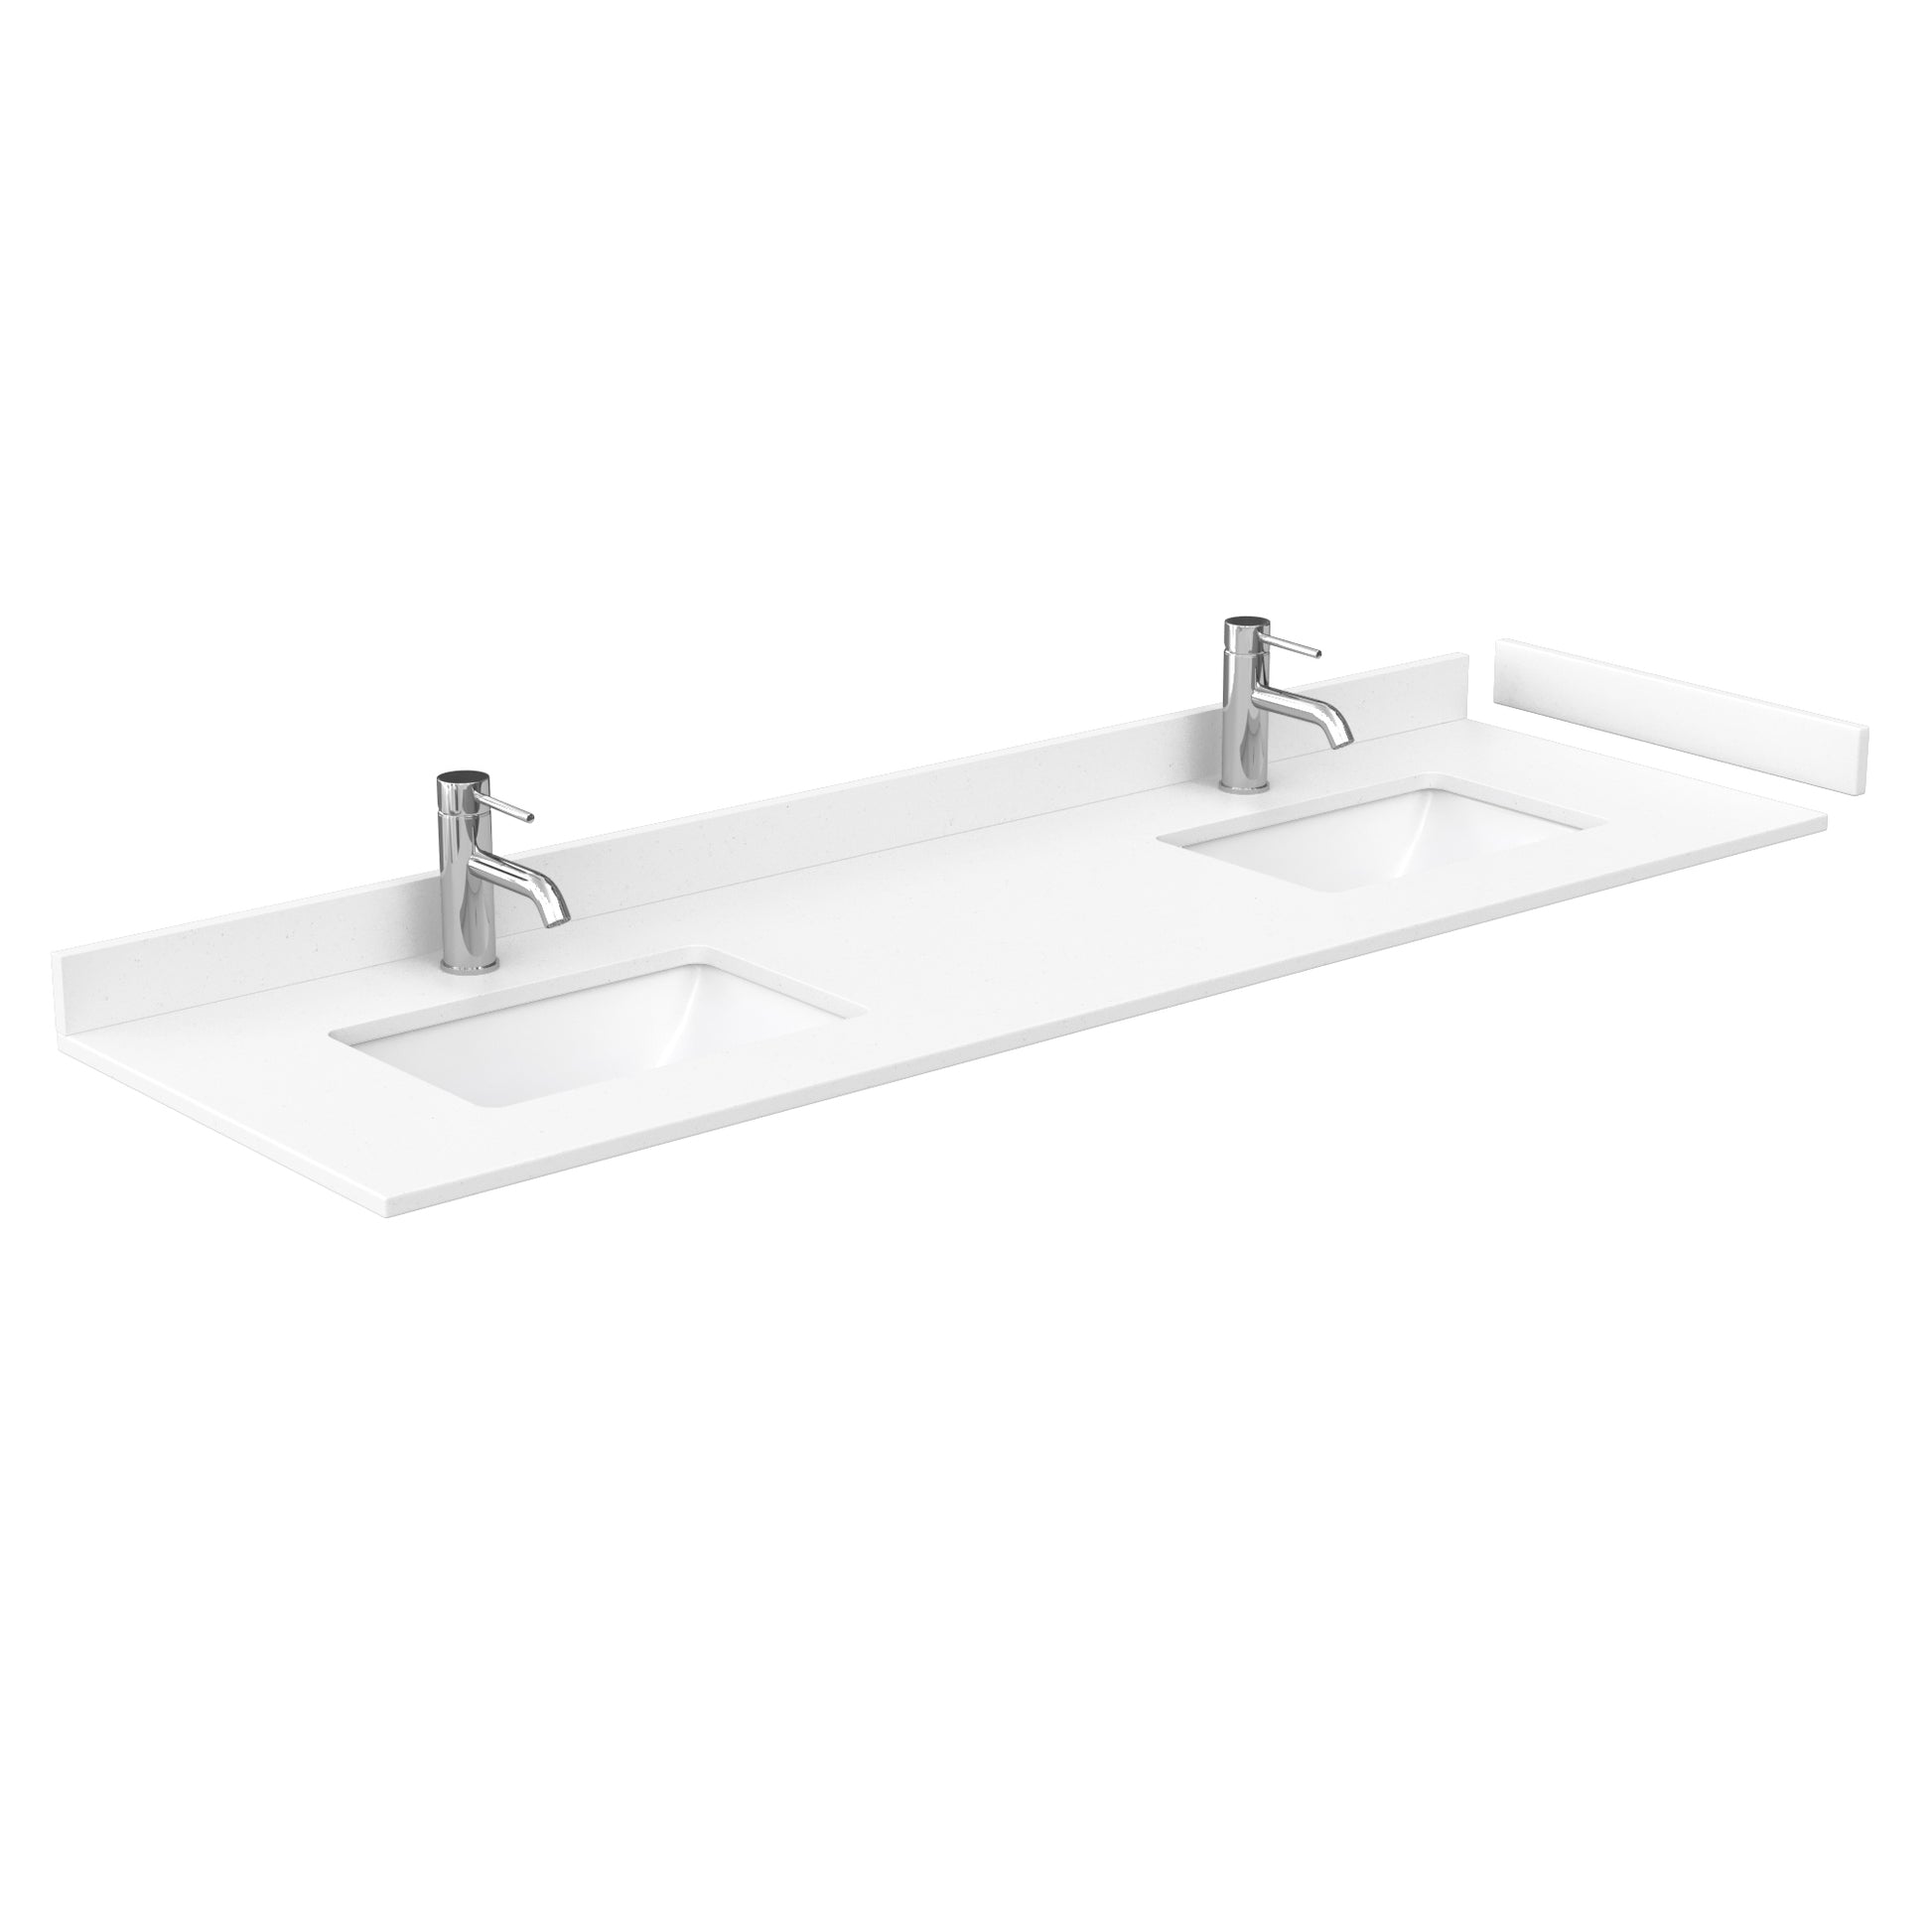 
  
  Marlena 72" Double Sink Vanity with Cultured Marble, Undermount Square Sink, Optional Trim
  
